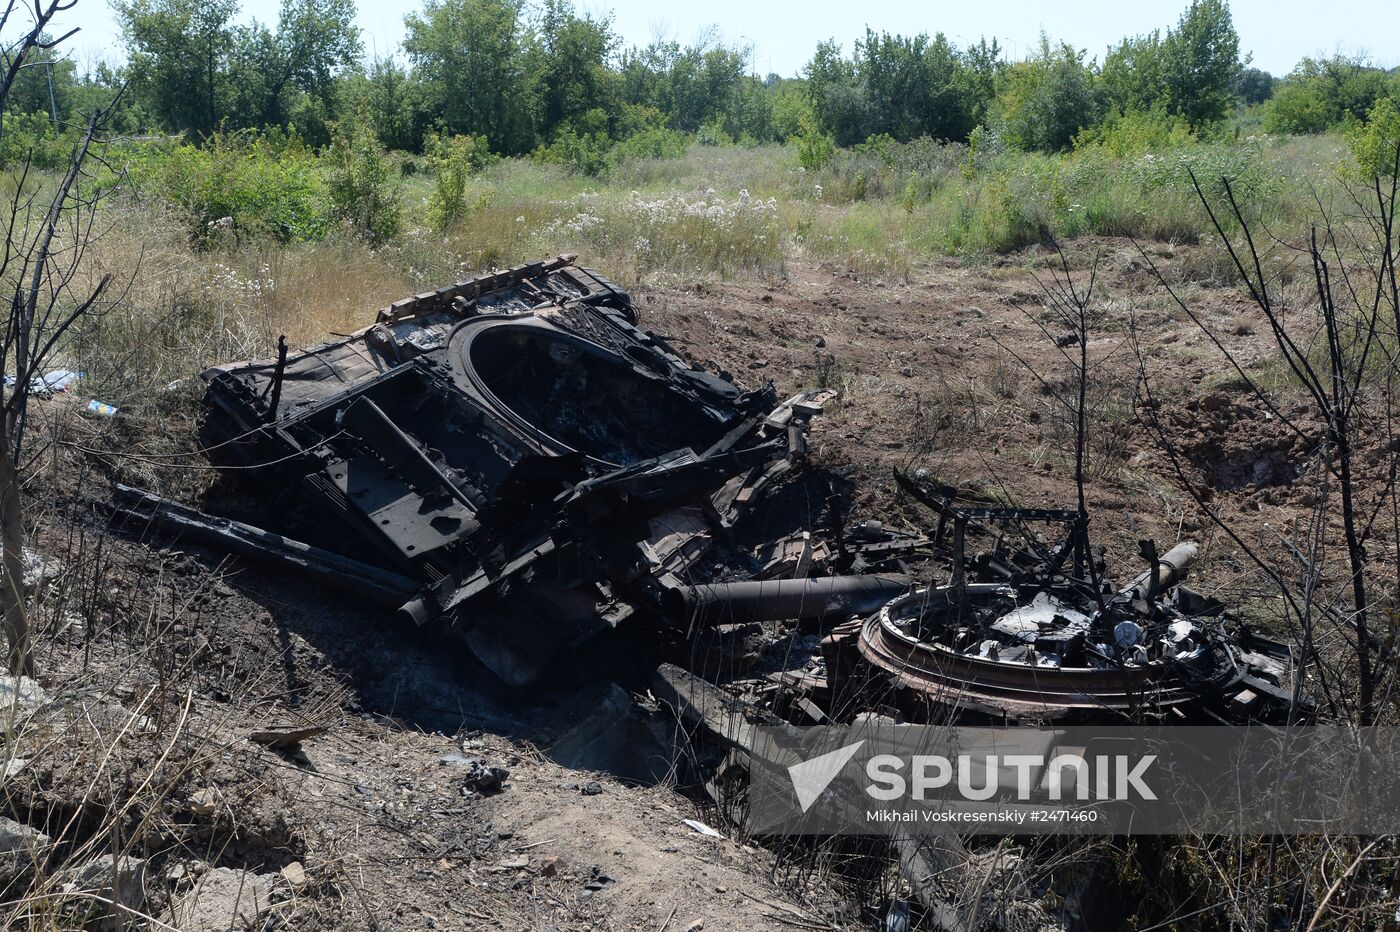 Ukrainian army's military equipment destroyed by militia at the entrance to Donetsk